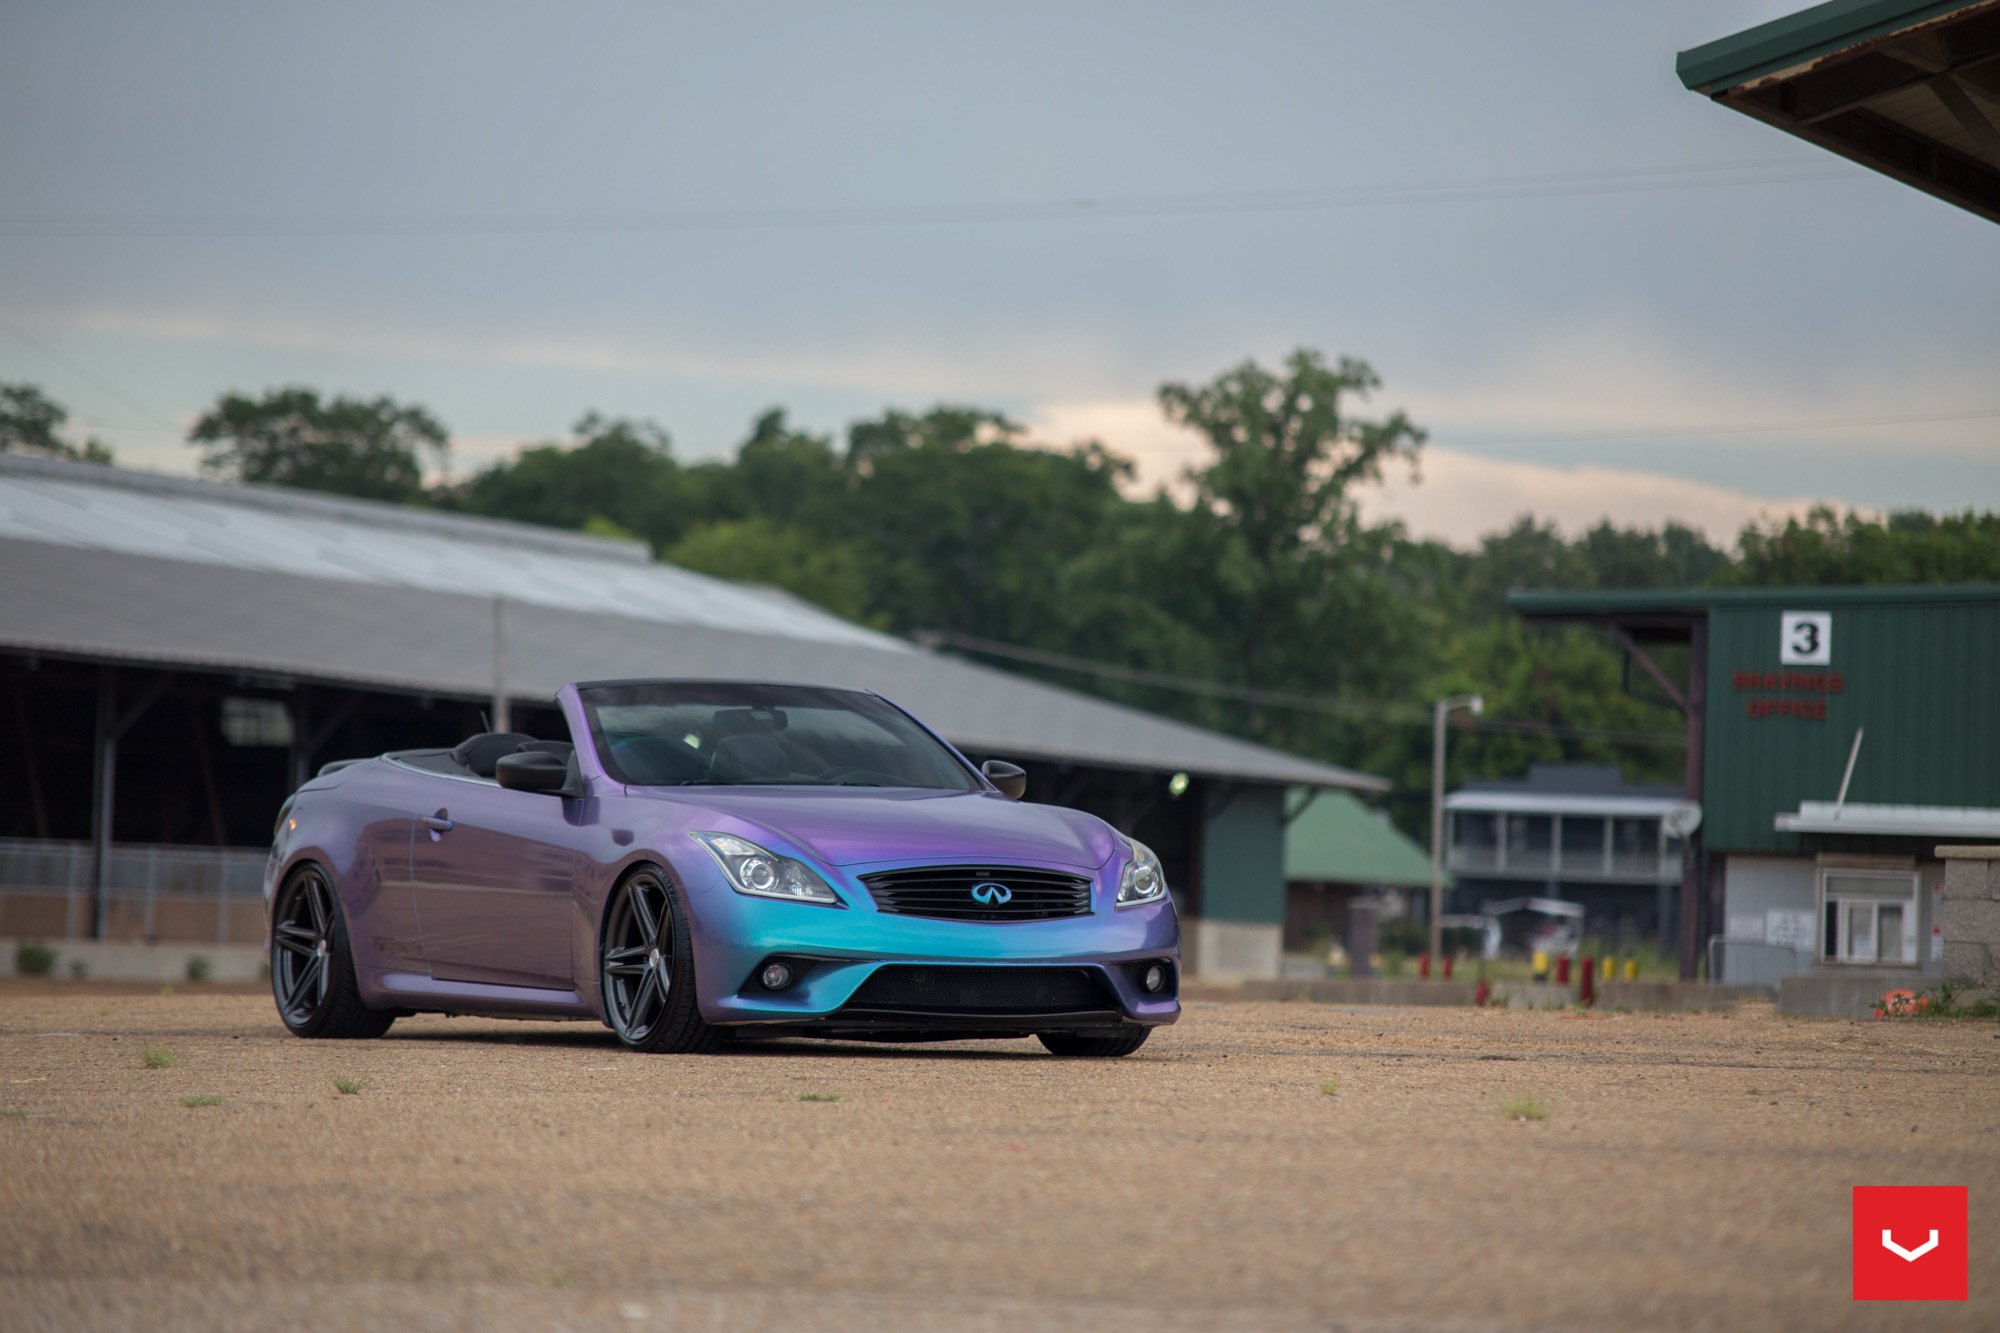 Aftermarket Front Bumper on Convertible Infiniti G37 - Photo by Vossen